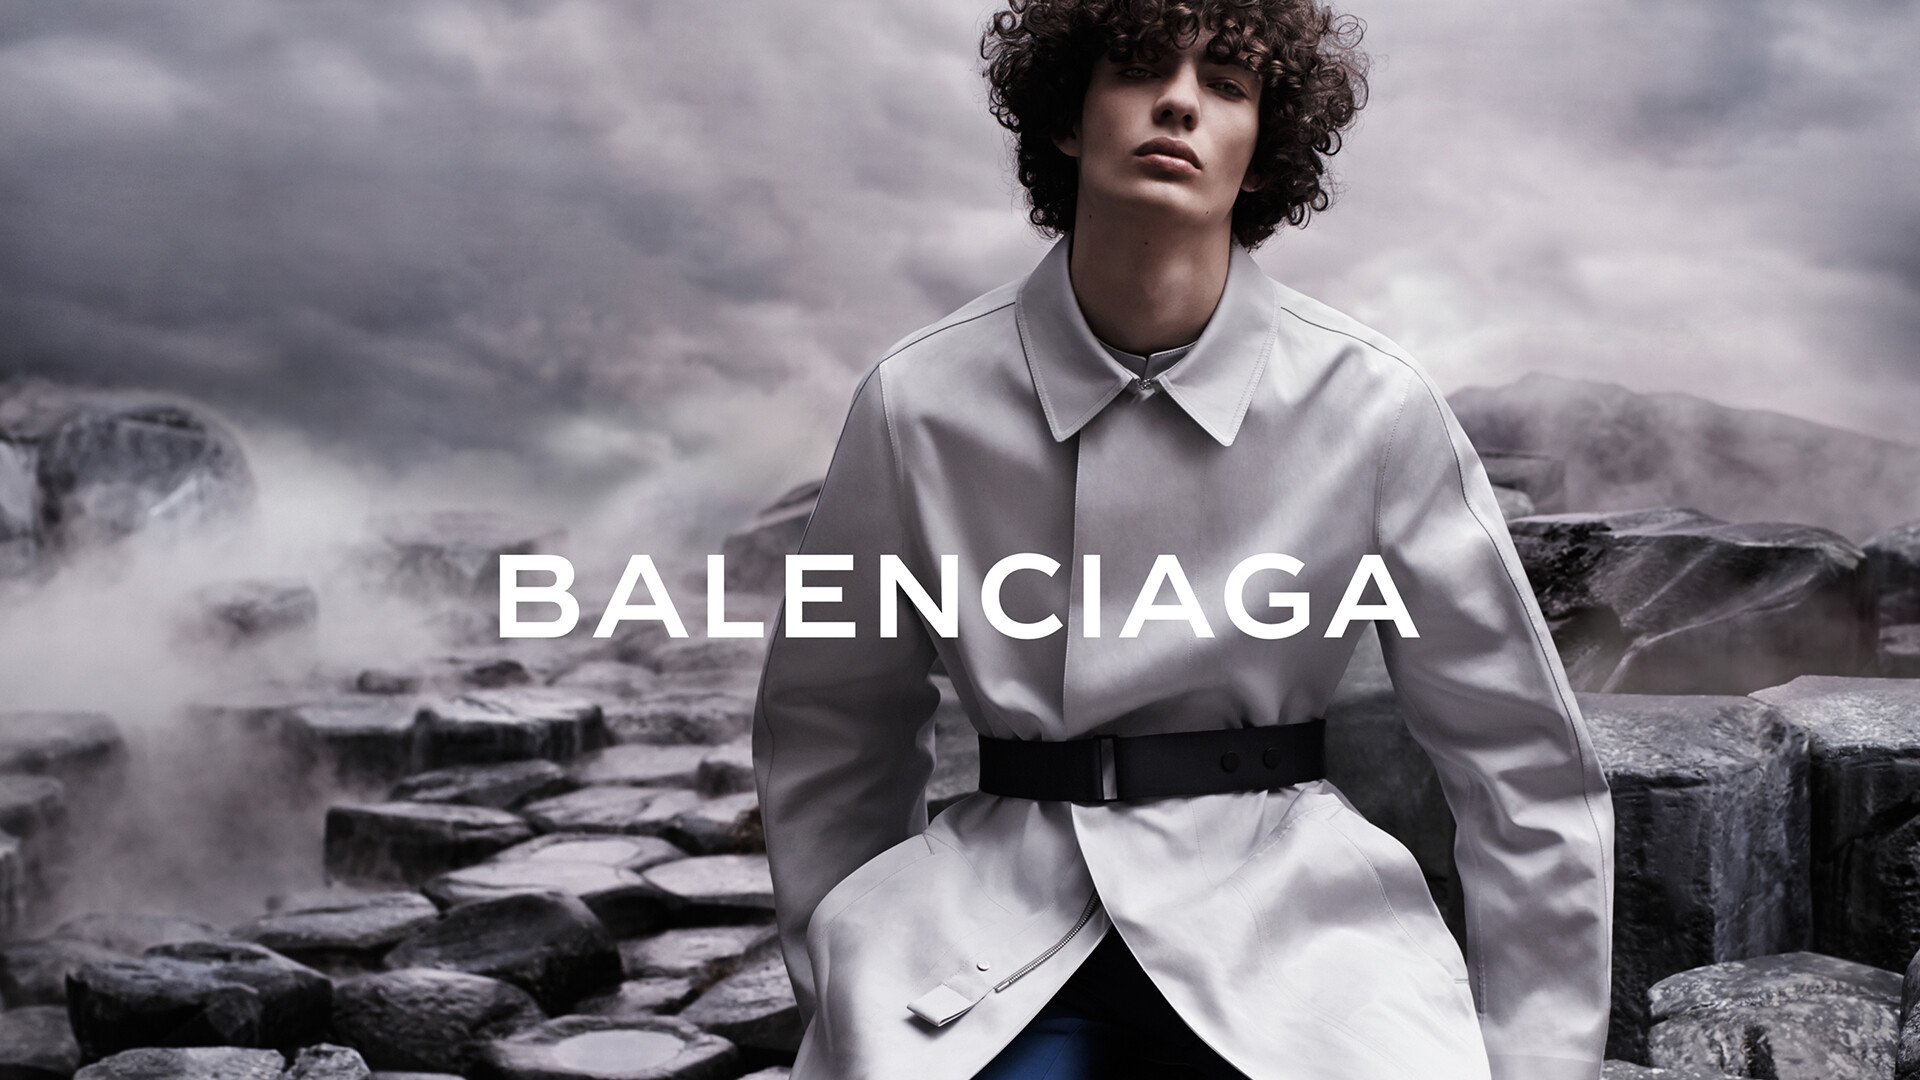 Balenciaga: One of the hottest brands in the fashion world, SS2015, Menswear collection, Model. 1920x1080 Full HD Wallpaper.